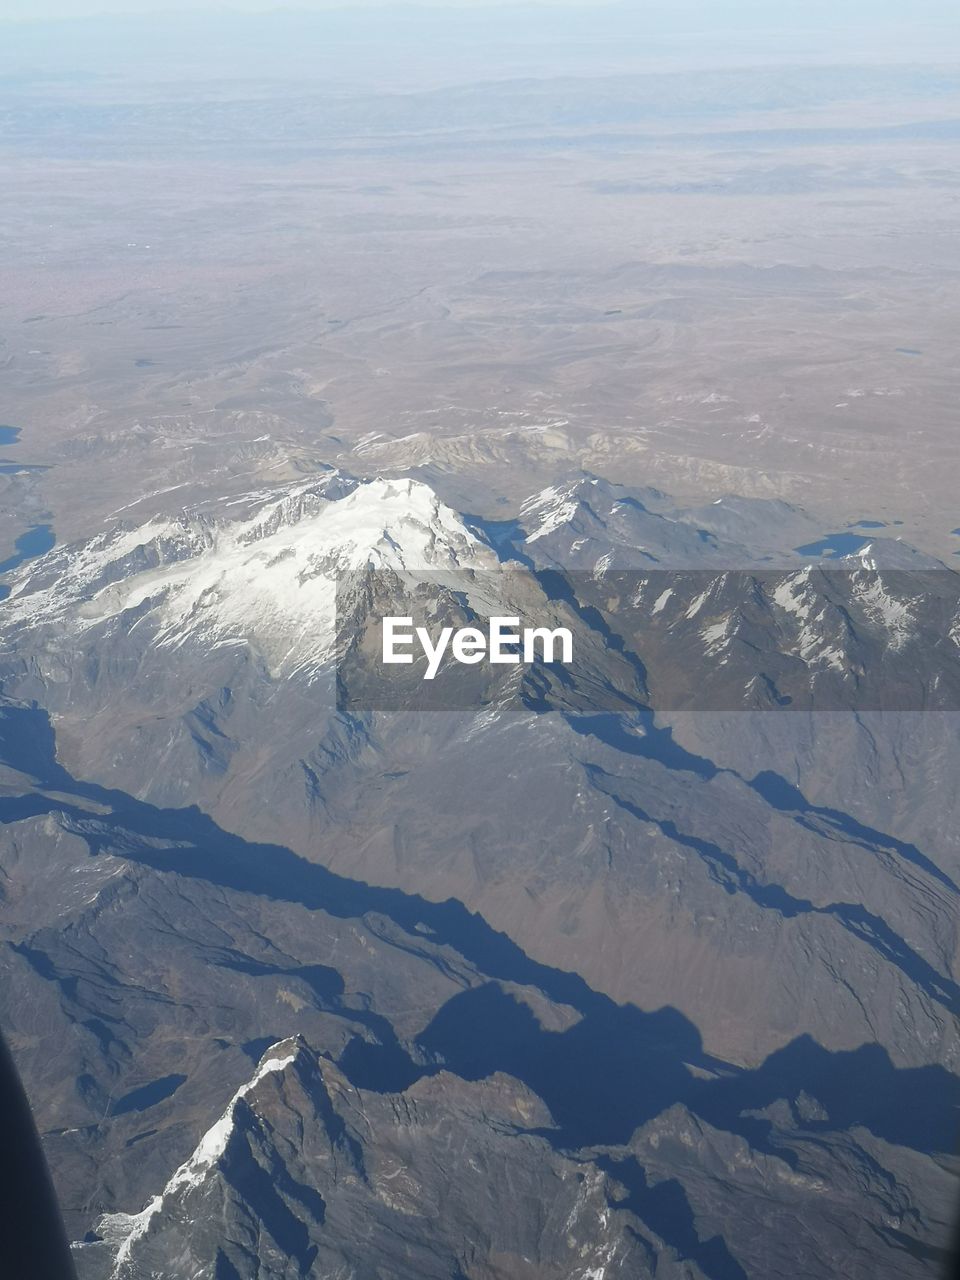 AERIAL VIEW OF SNOW COVERED MOUNTAINS